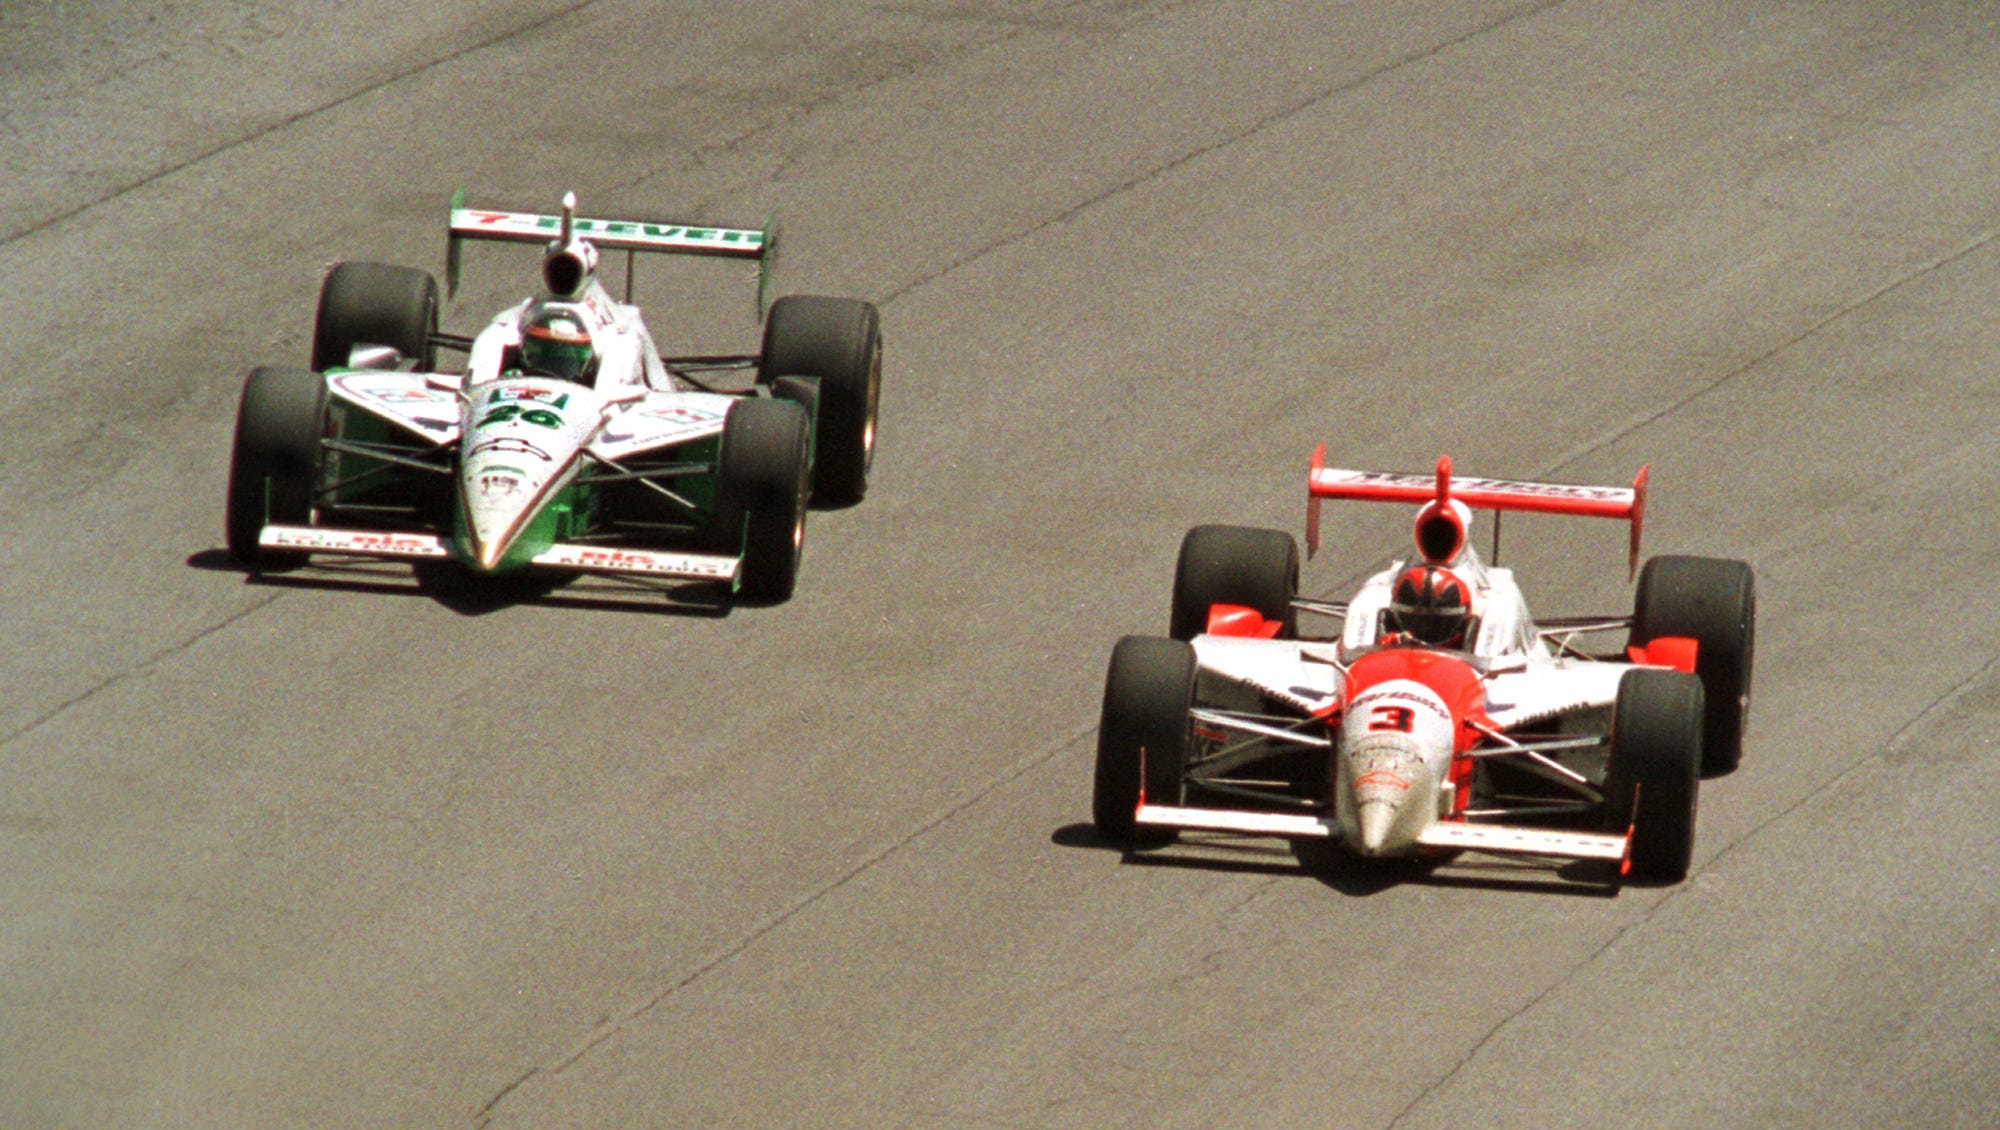 Indy 500 winners Did Paul Tracy or Helio Castroneves win 2002 race?